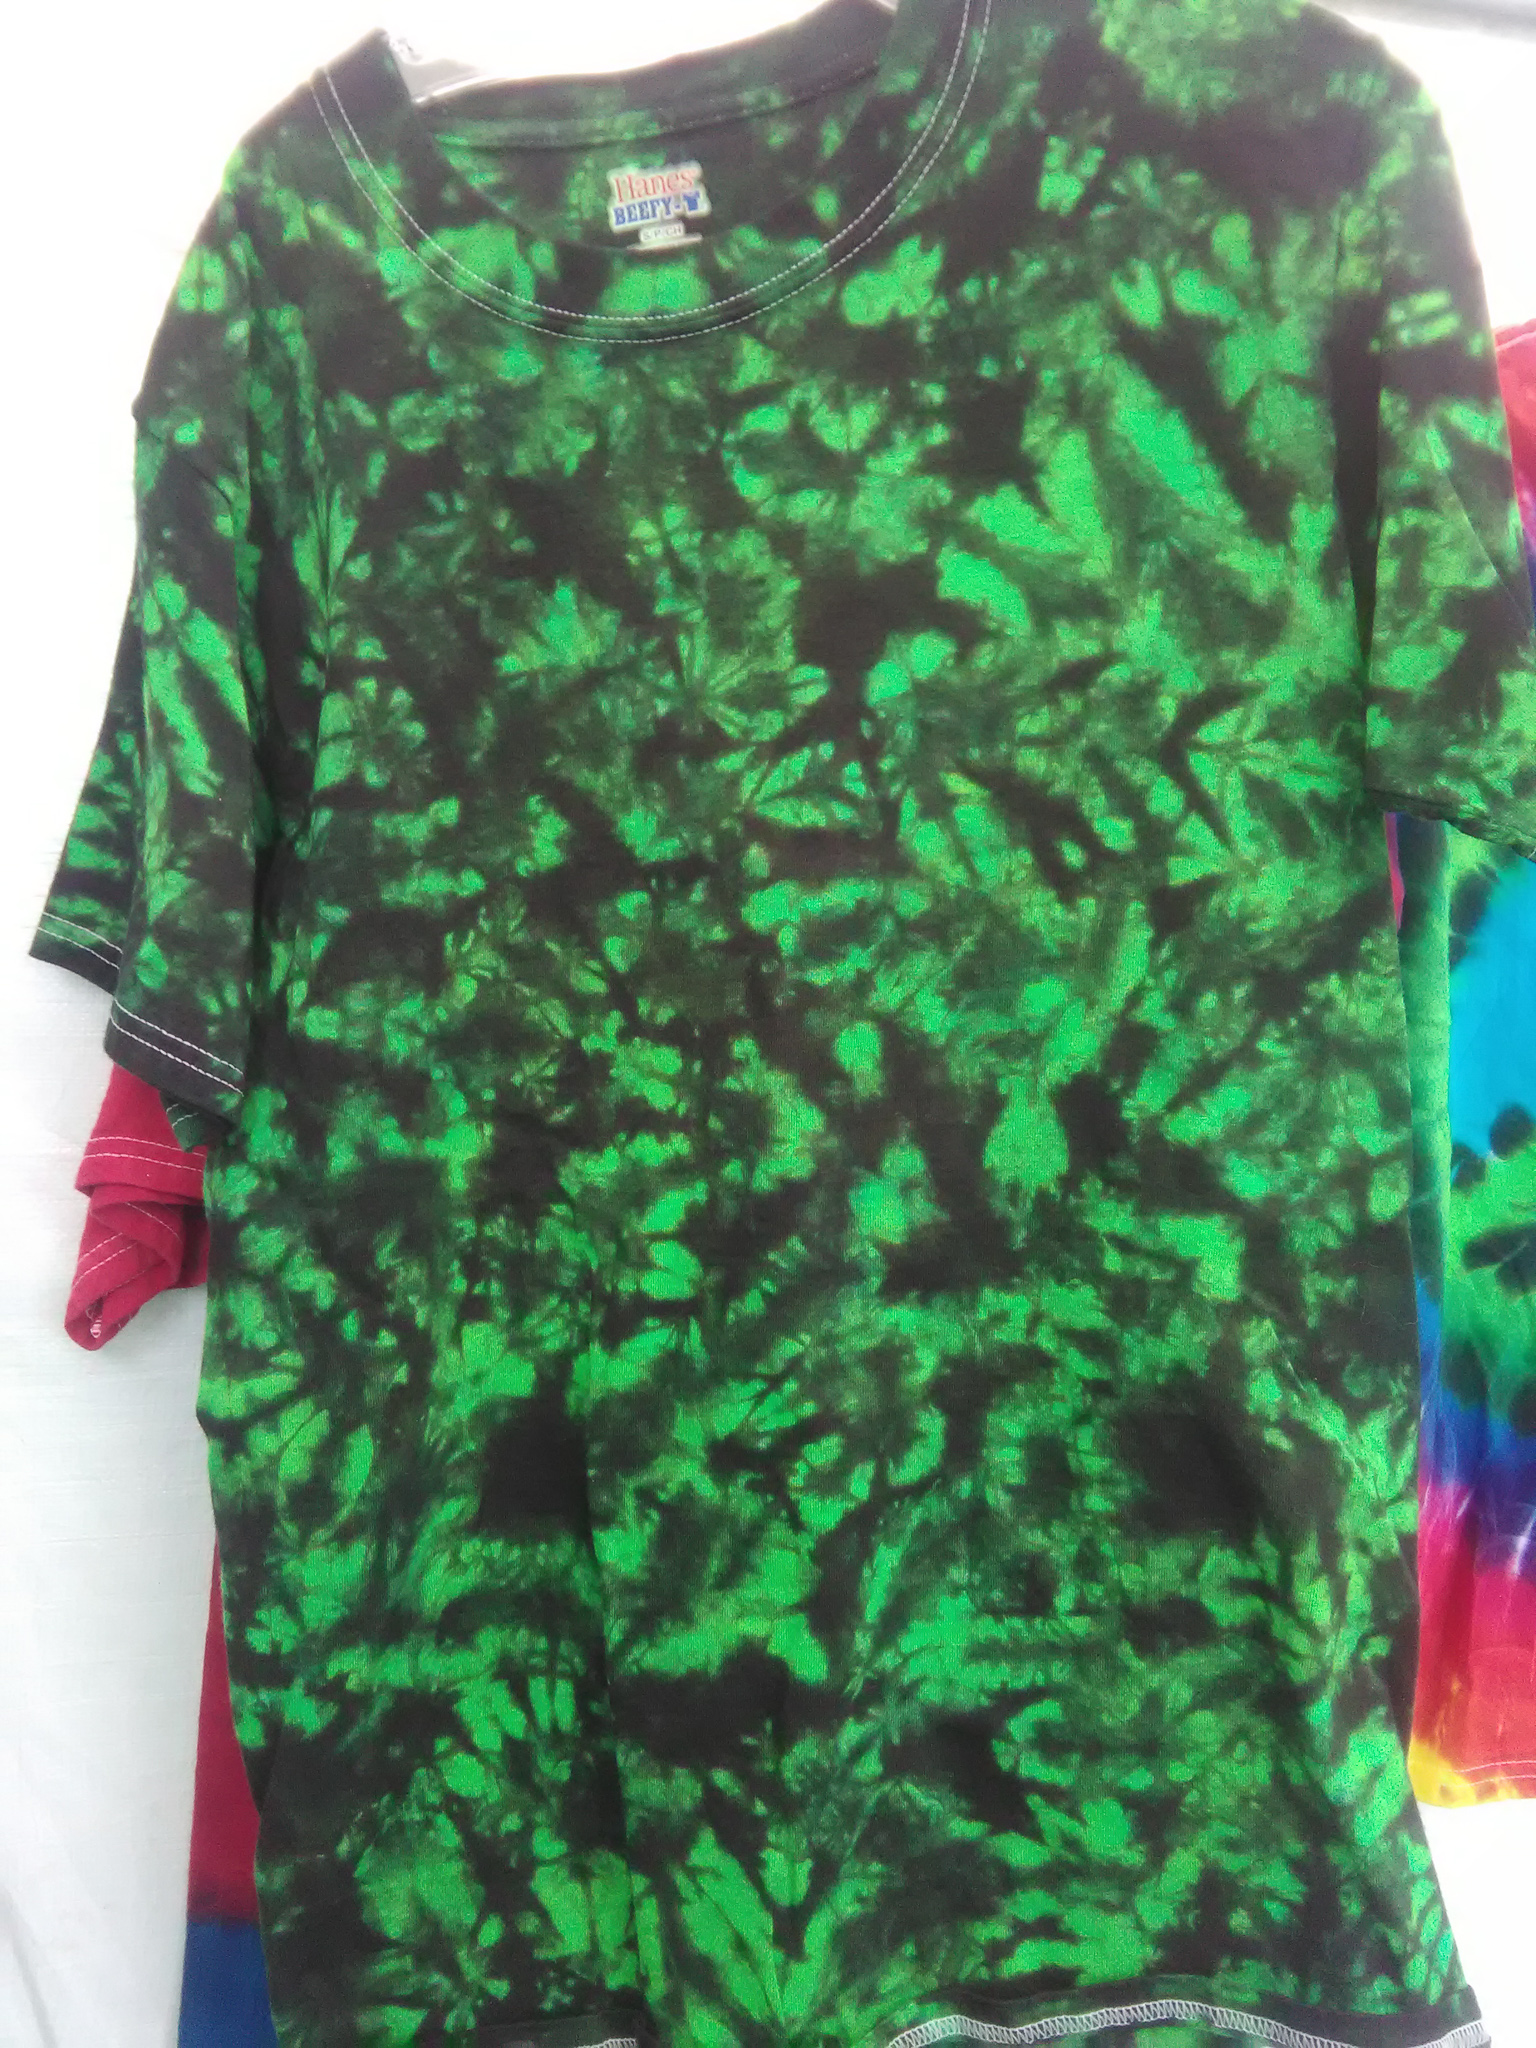  Green and Jet Black Fractal Tie-dyed Tees